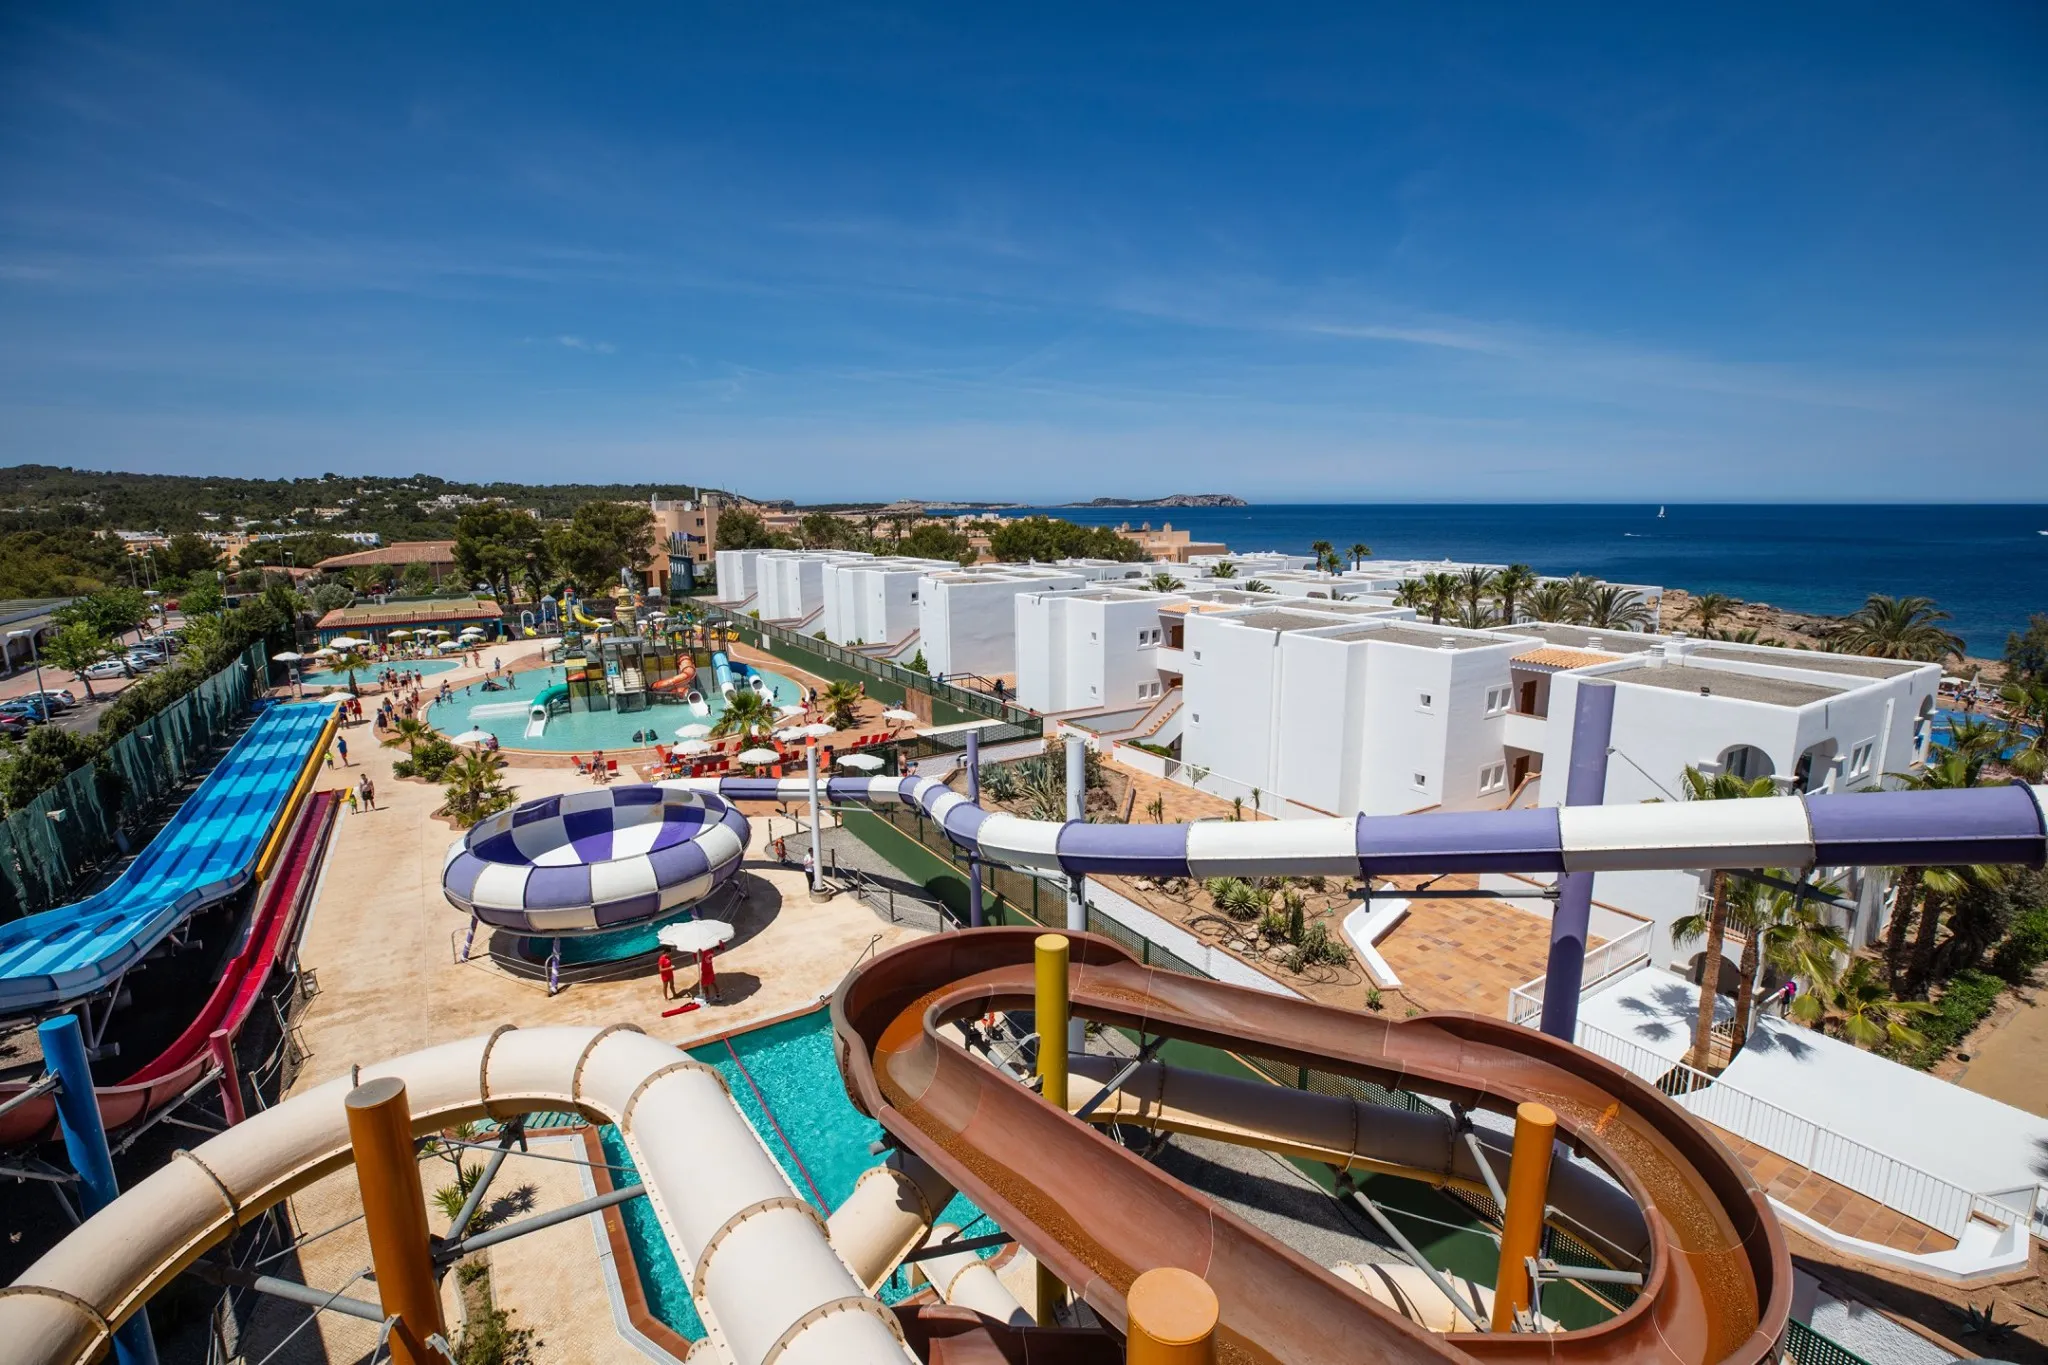 Sirenis Aquagames Eivissa in Spain, Europe | Water Parks - Rated 3.1